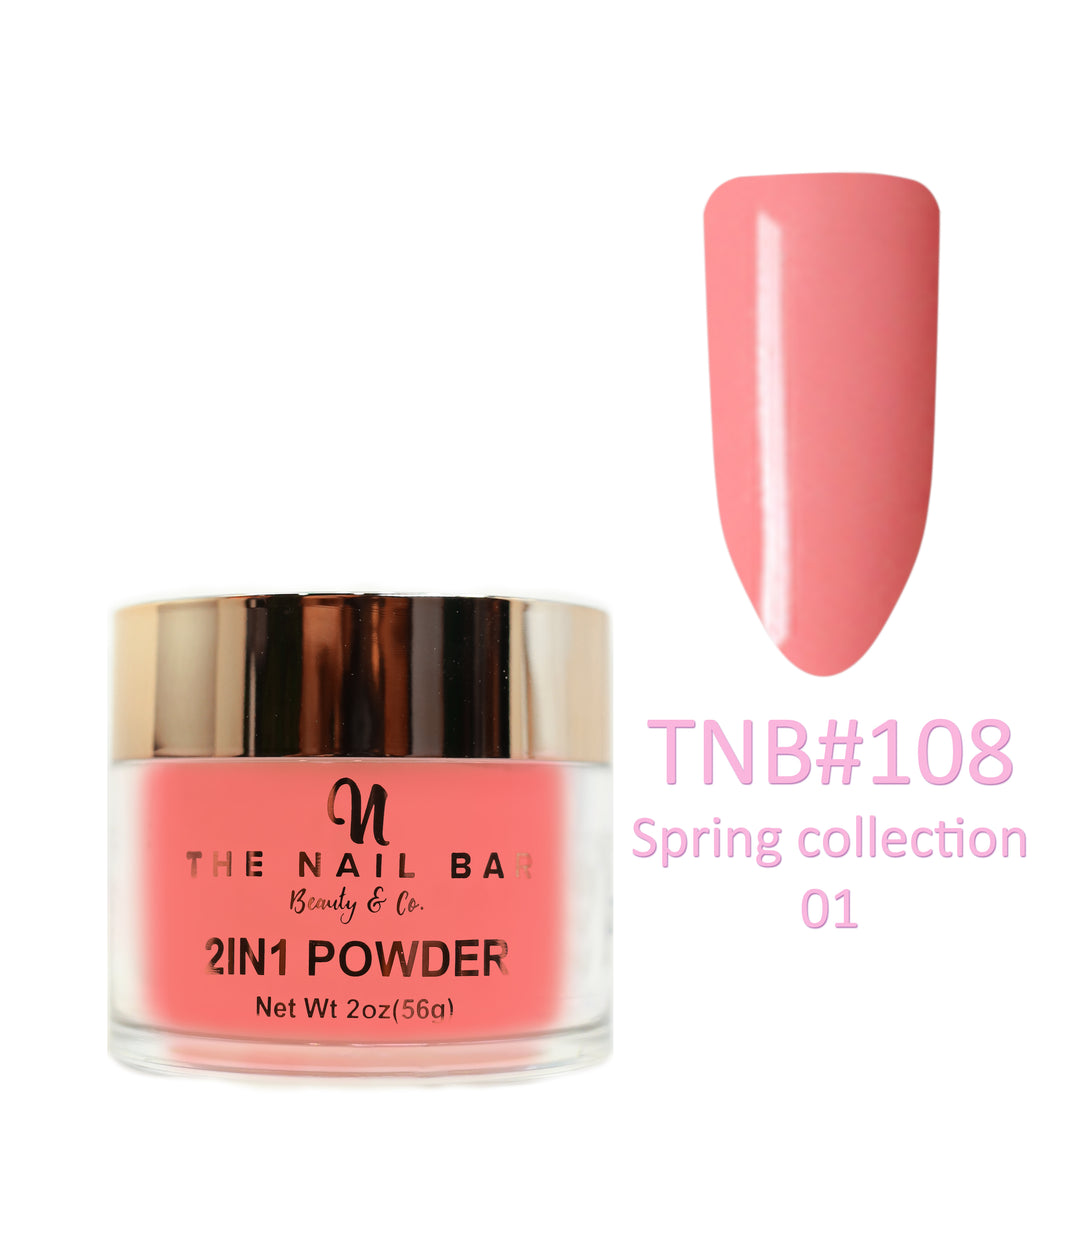 2-In-1 Dipping/Acrylic colour powder (2oz) -Spring collection 01 - The Nail Bar Beauty & Co.